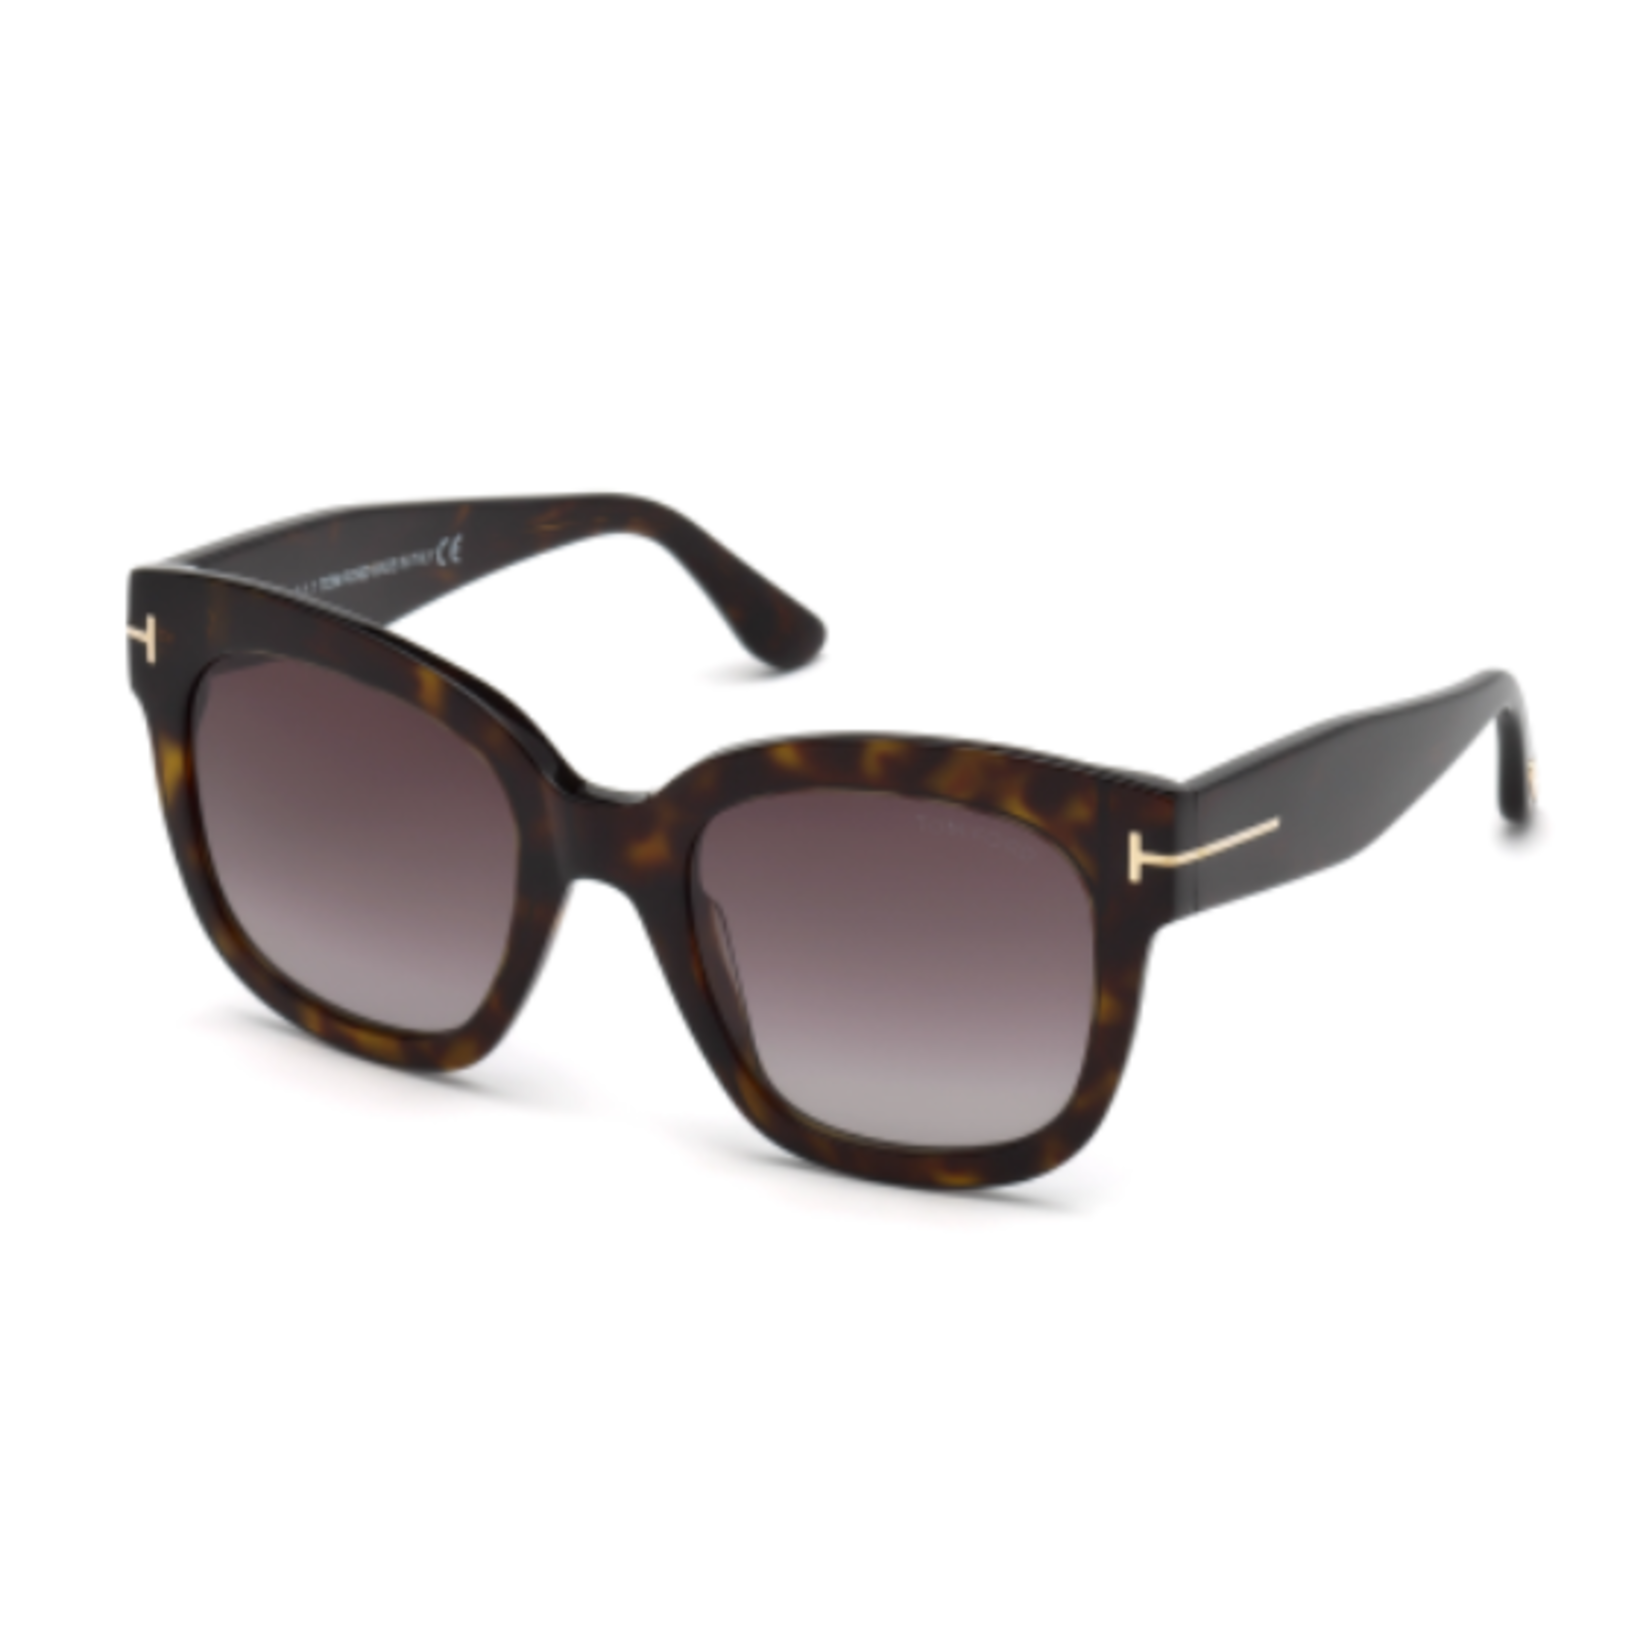 Tom Ford - 613 - 52T